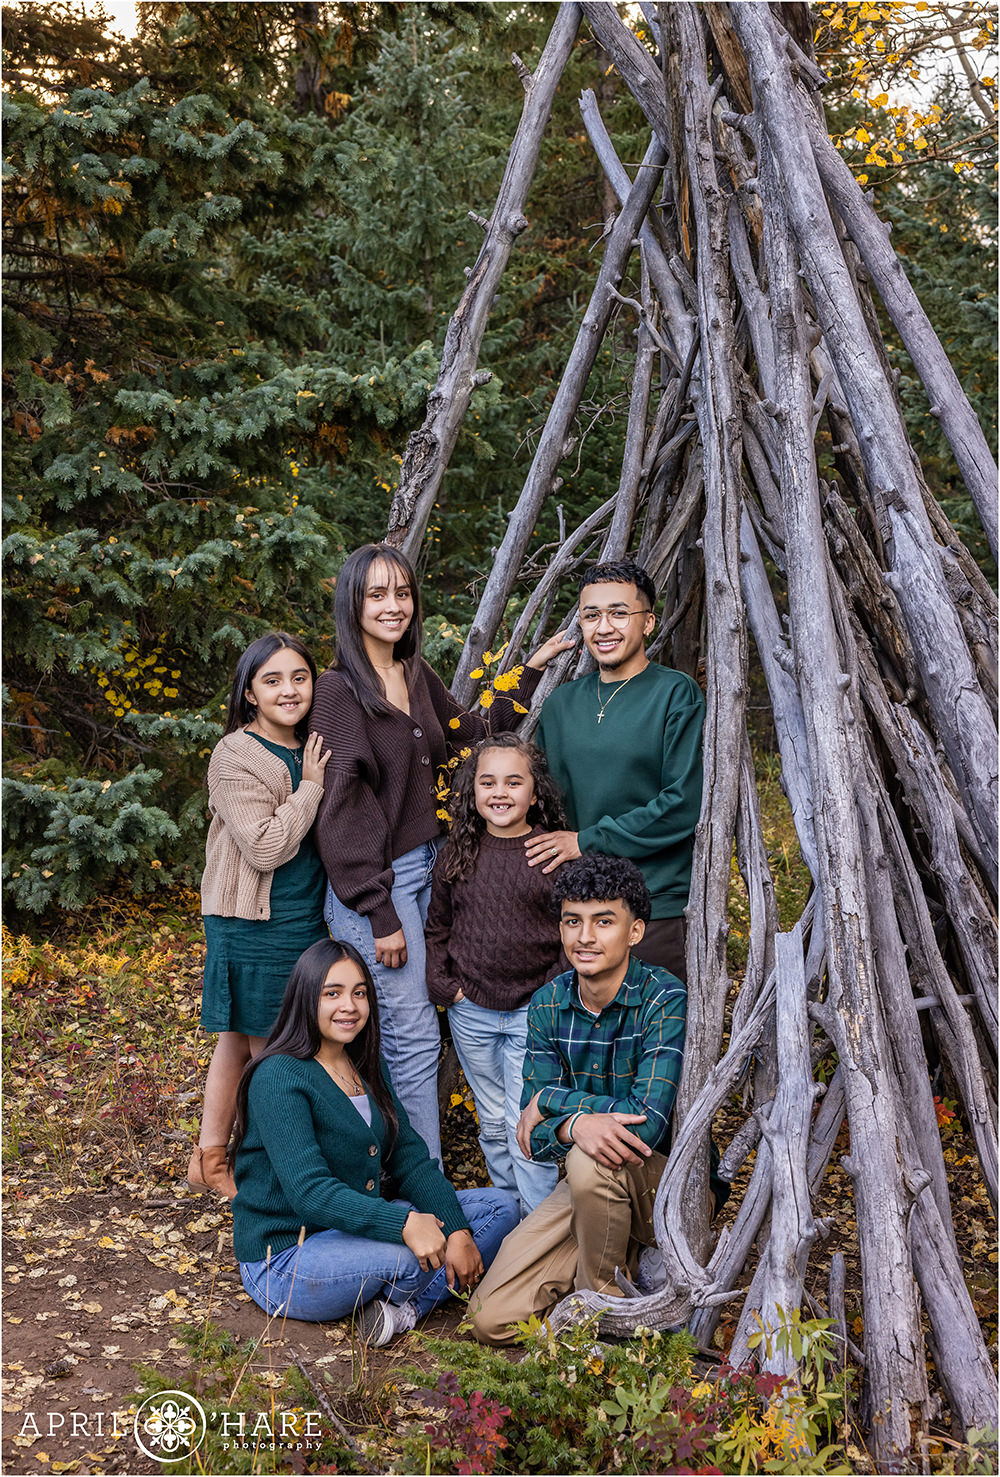 Six kids pose for a photo together in the woods of Colorado during autumn